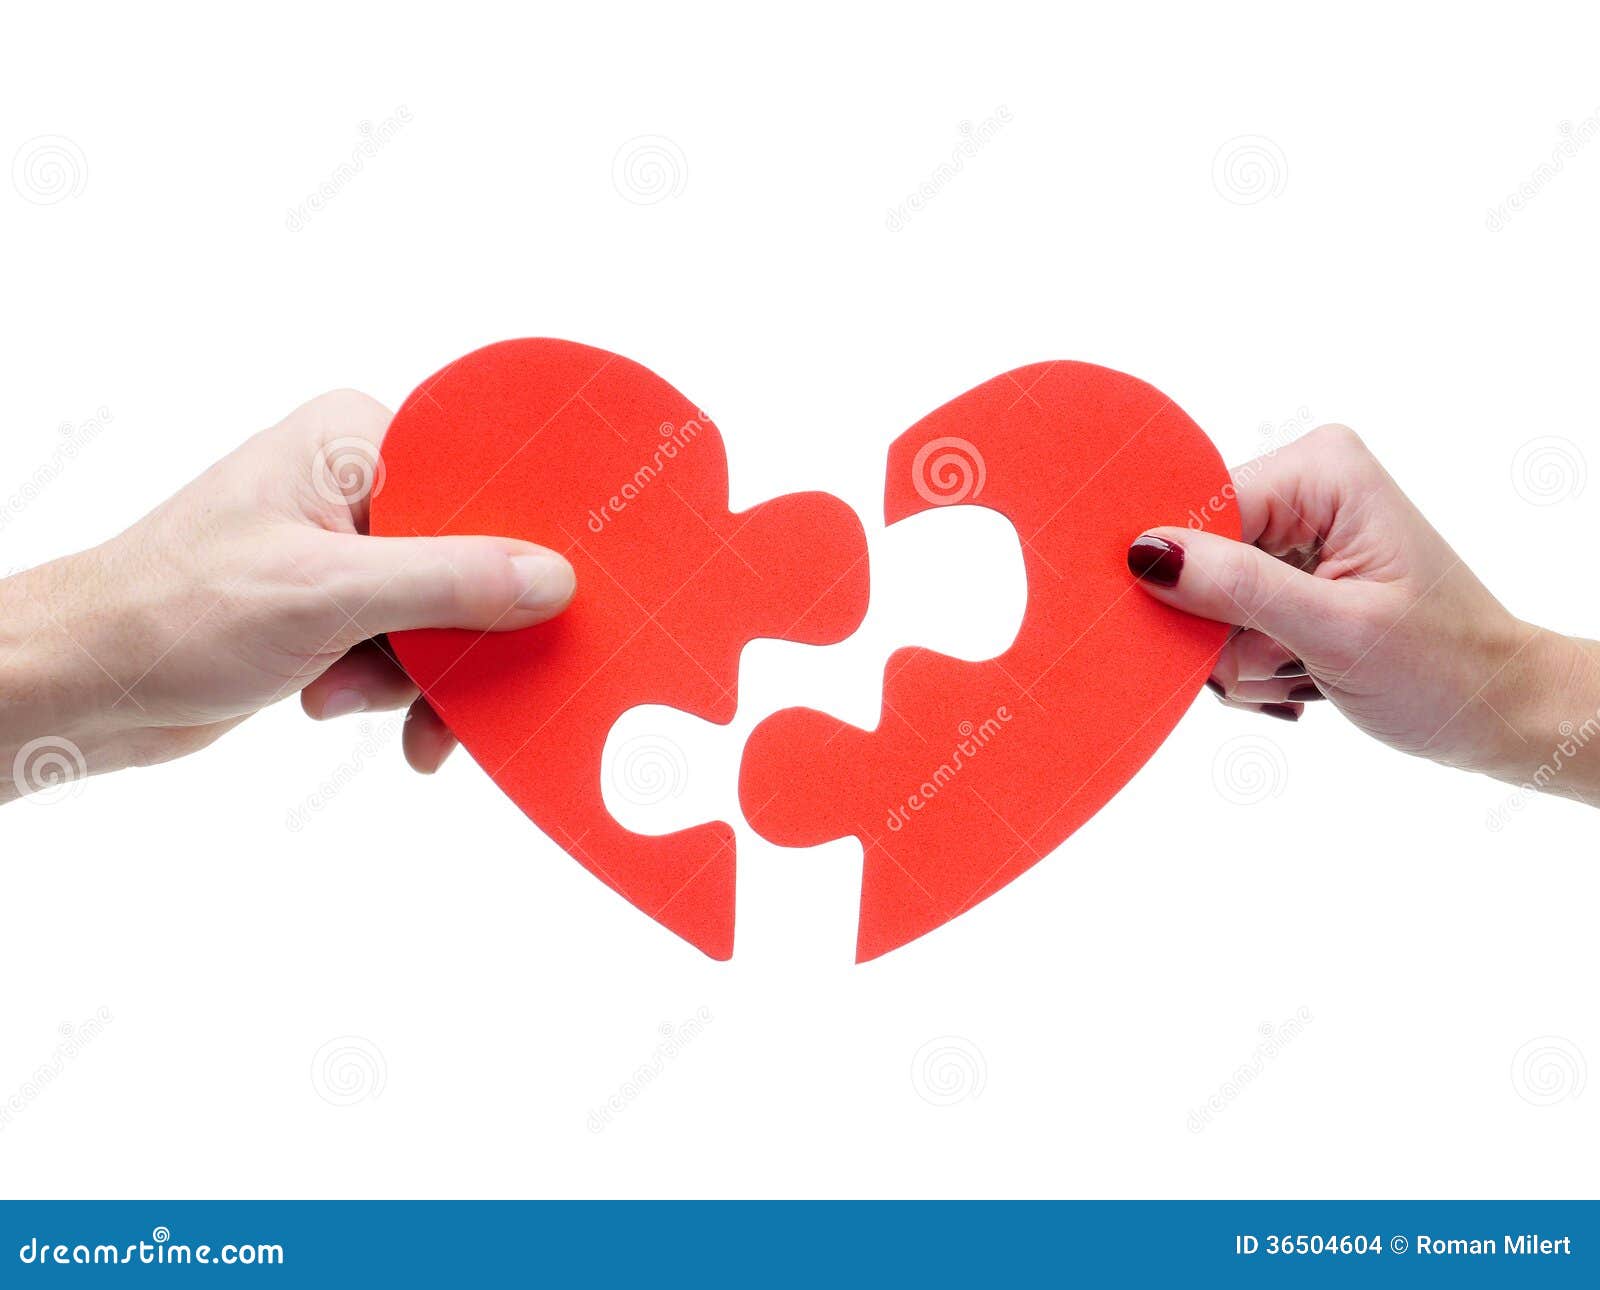 perfect-match-male-female-hand-matching-red-jigsaw-heart-halves-over-white-background-36504604.jpg